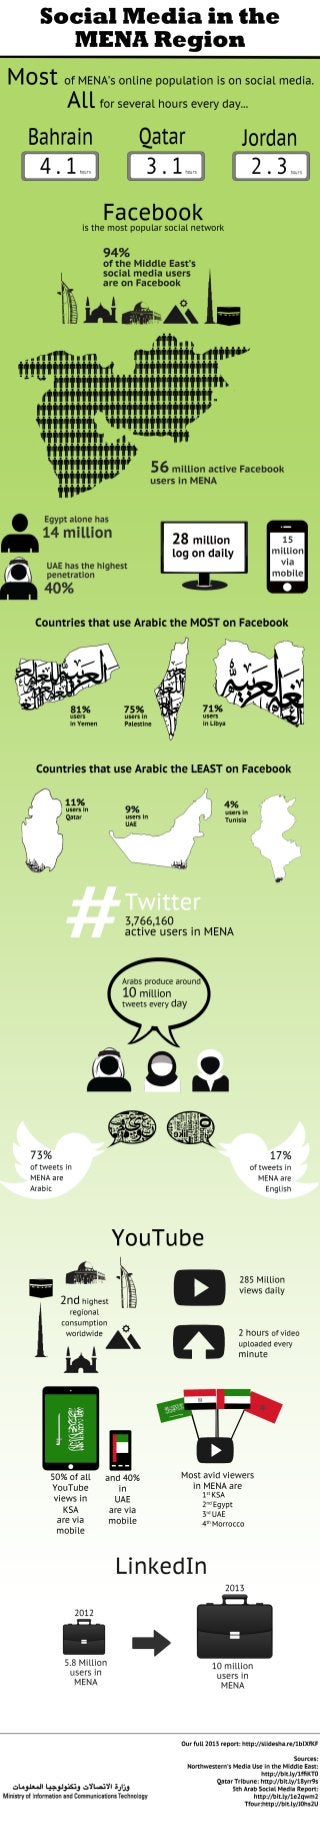 Infographic Social Media in the Middle East